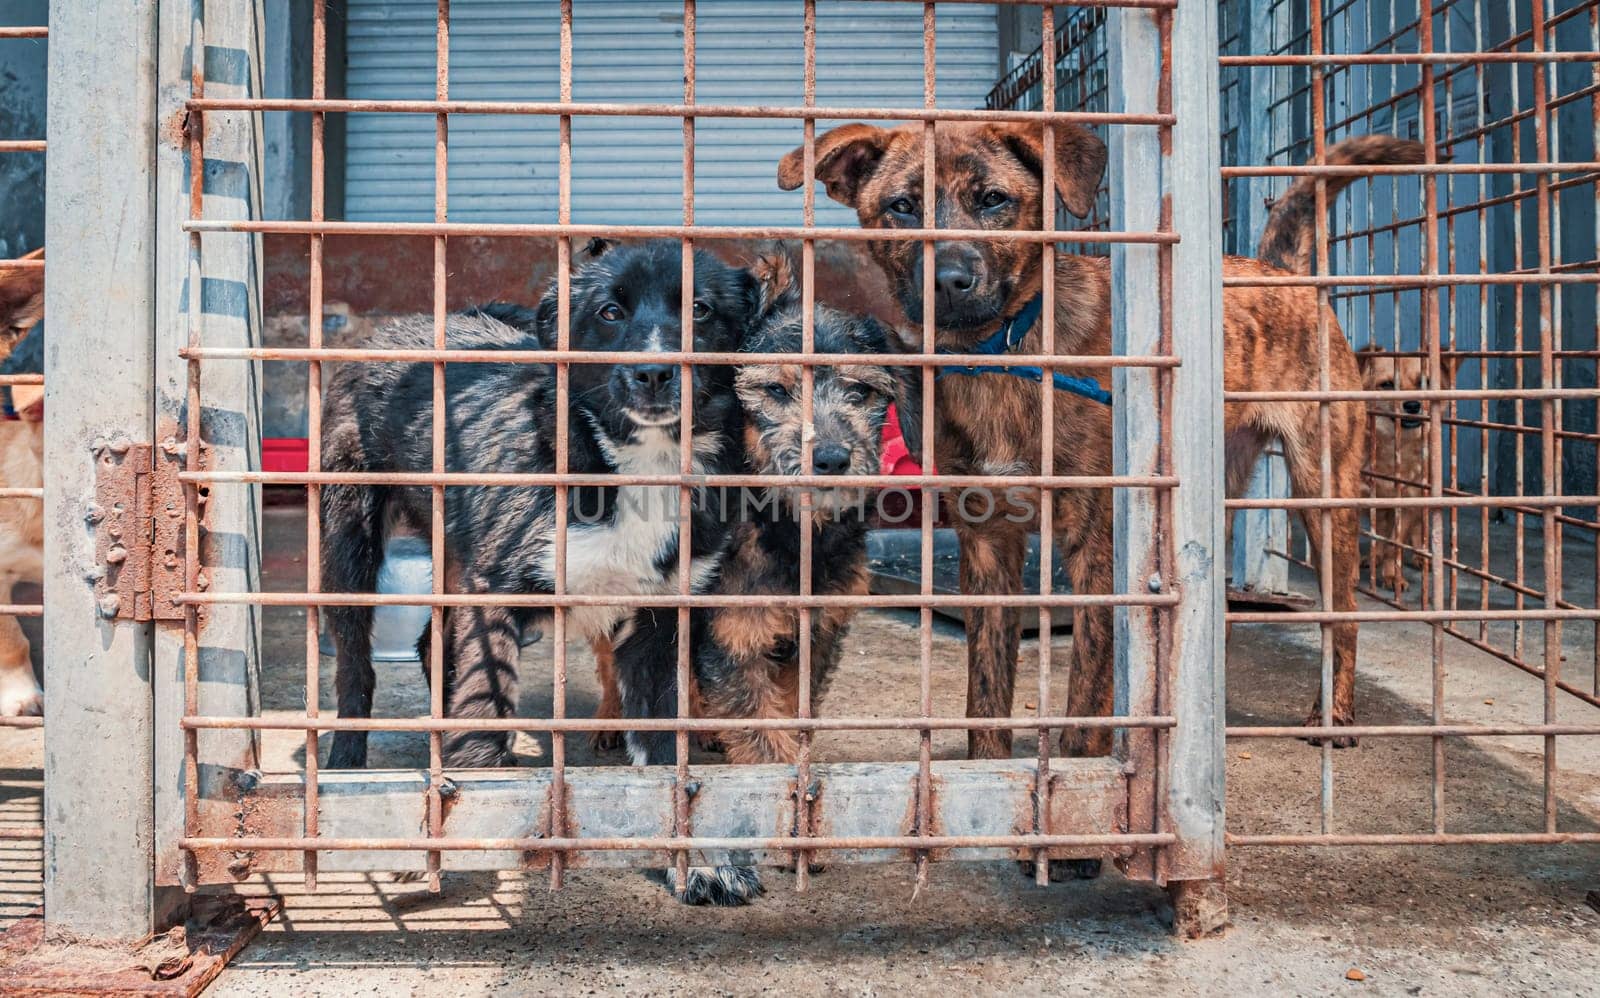 Unwanted and homeless dogs of different breeds in animal shelter. Looking and waiting for people to come adopt. Shelter for animals concept by Busker